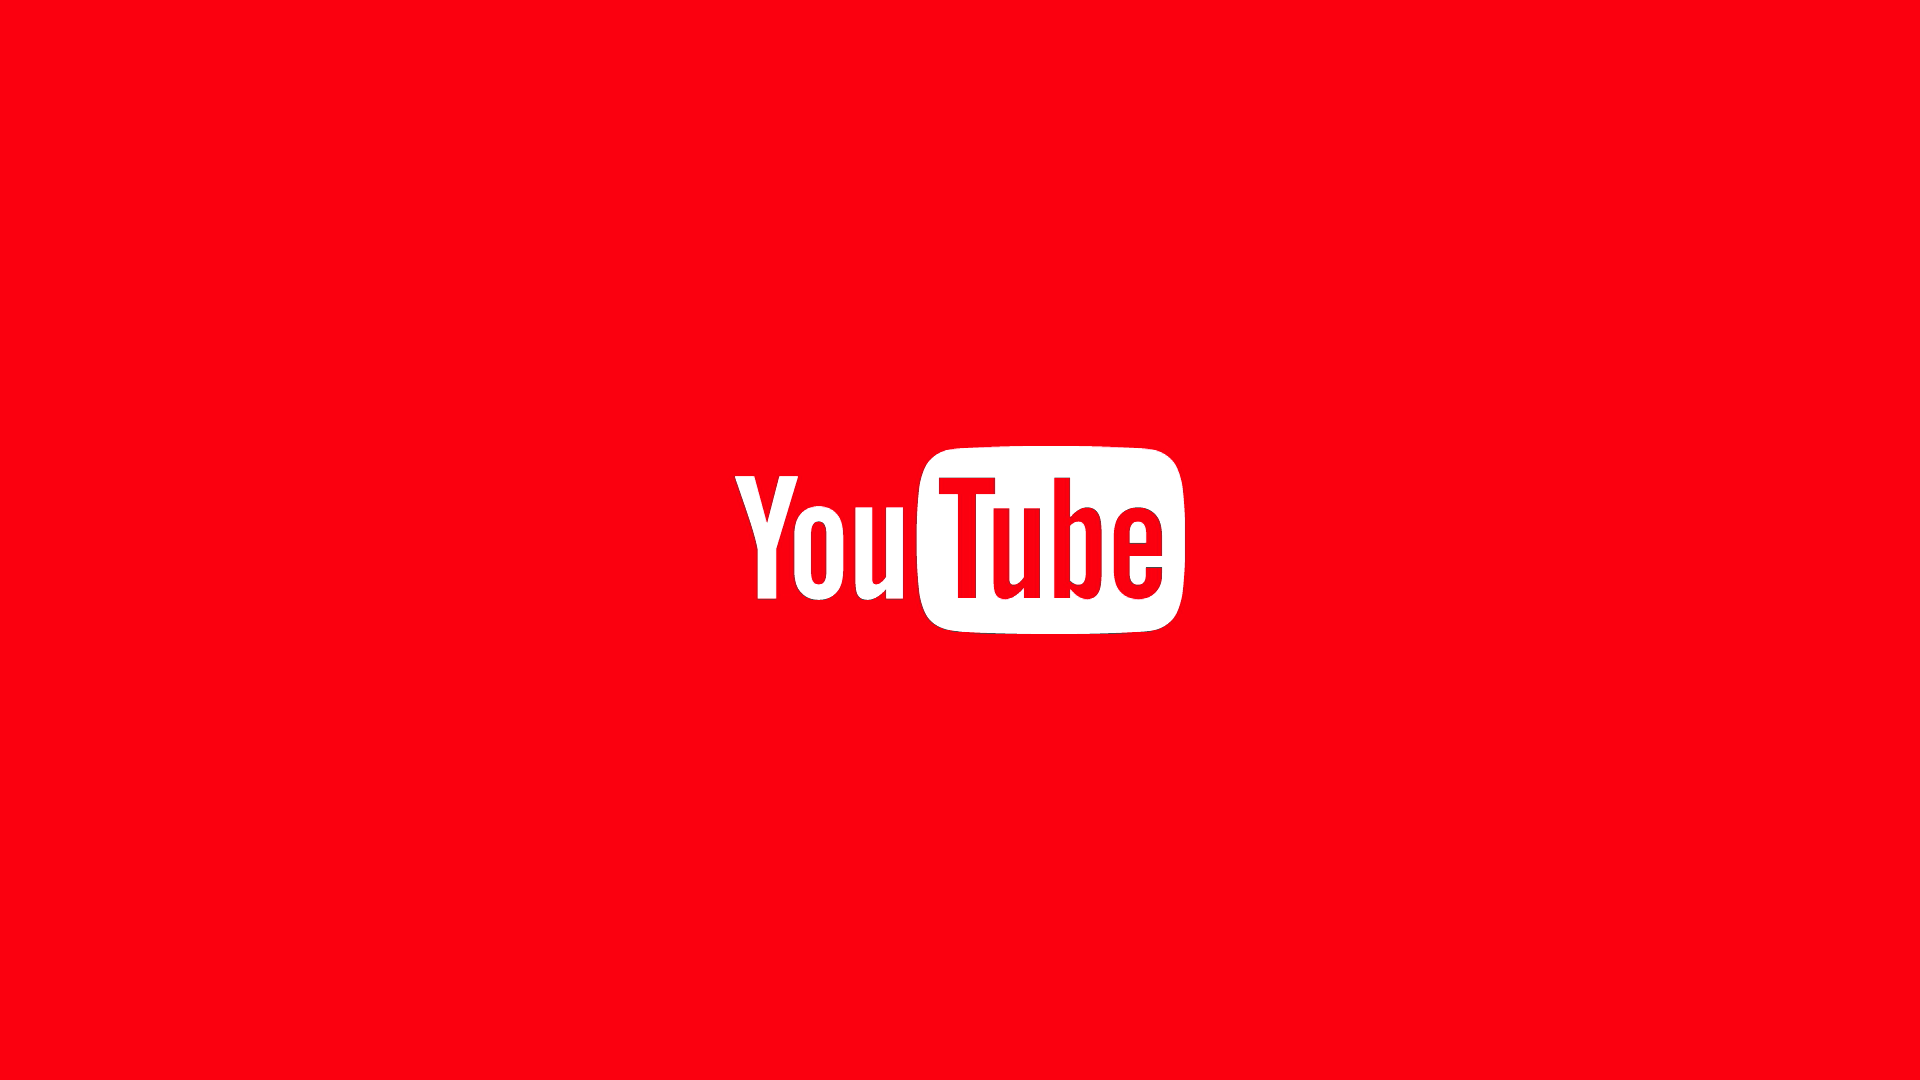 YouTube video advertising to grow your business